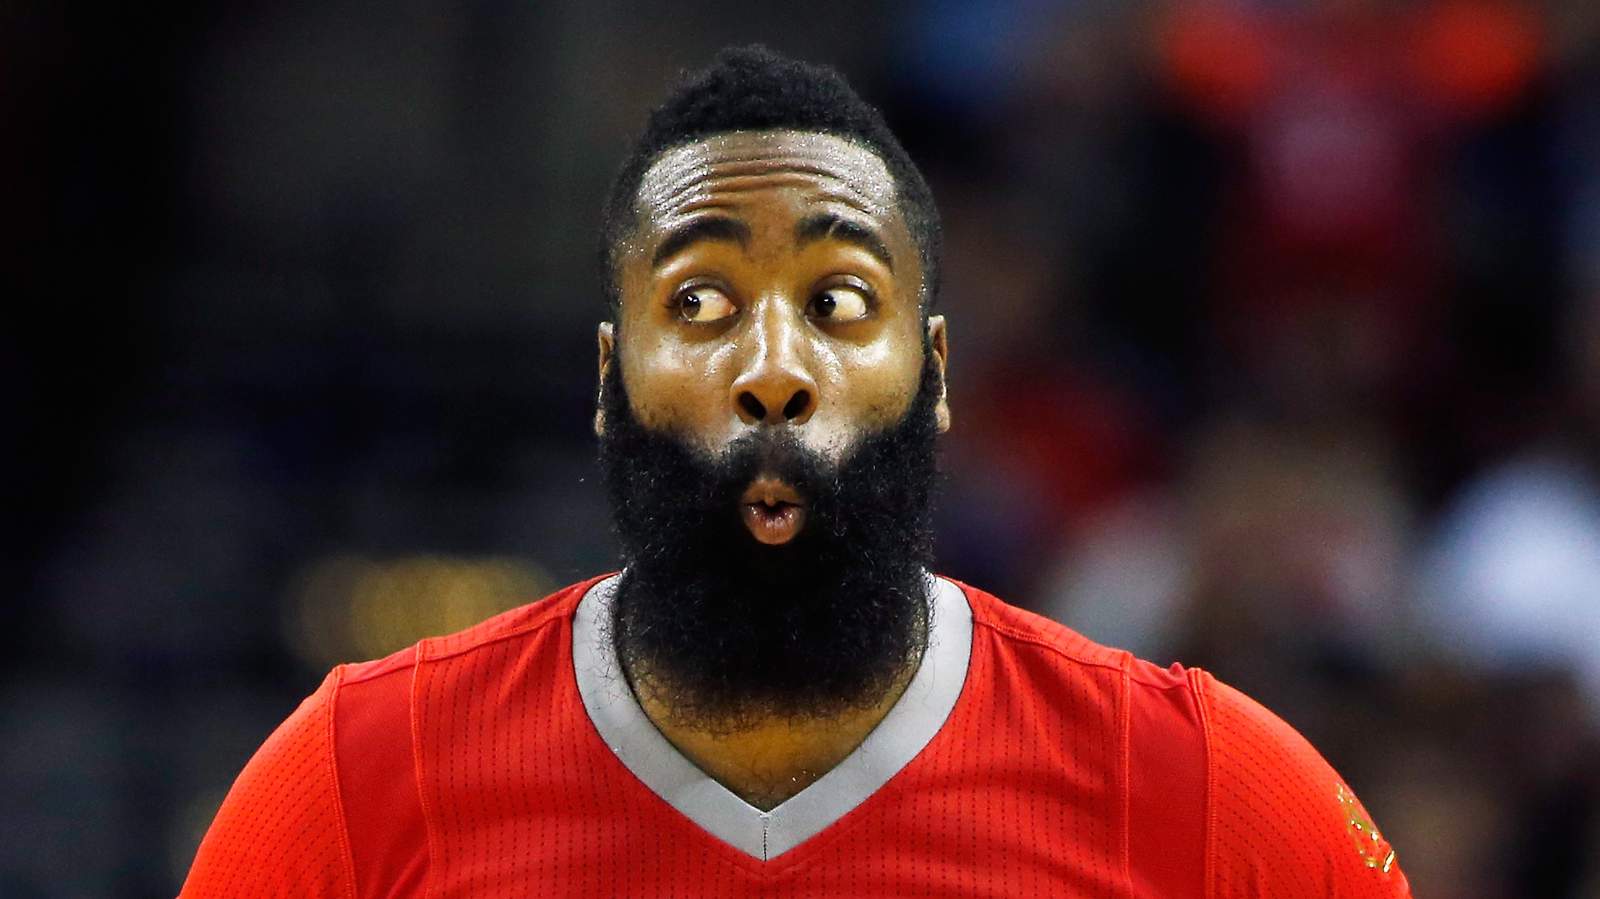 James Harden gifts Prada bag with $100K cash to rapper Lil Baby